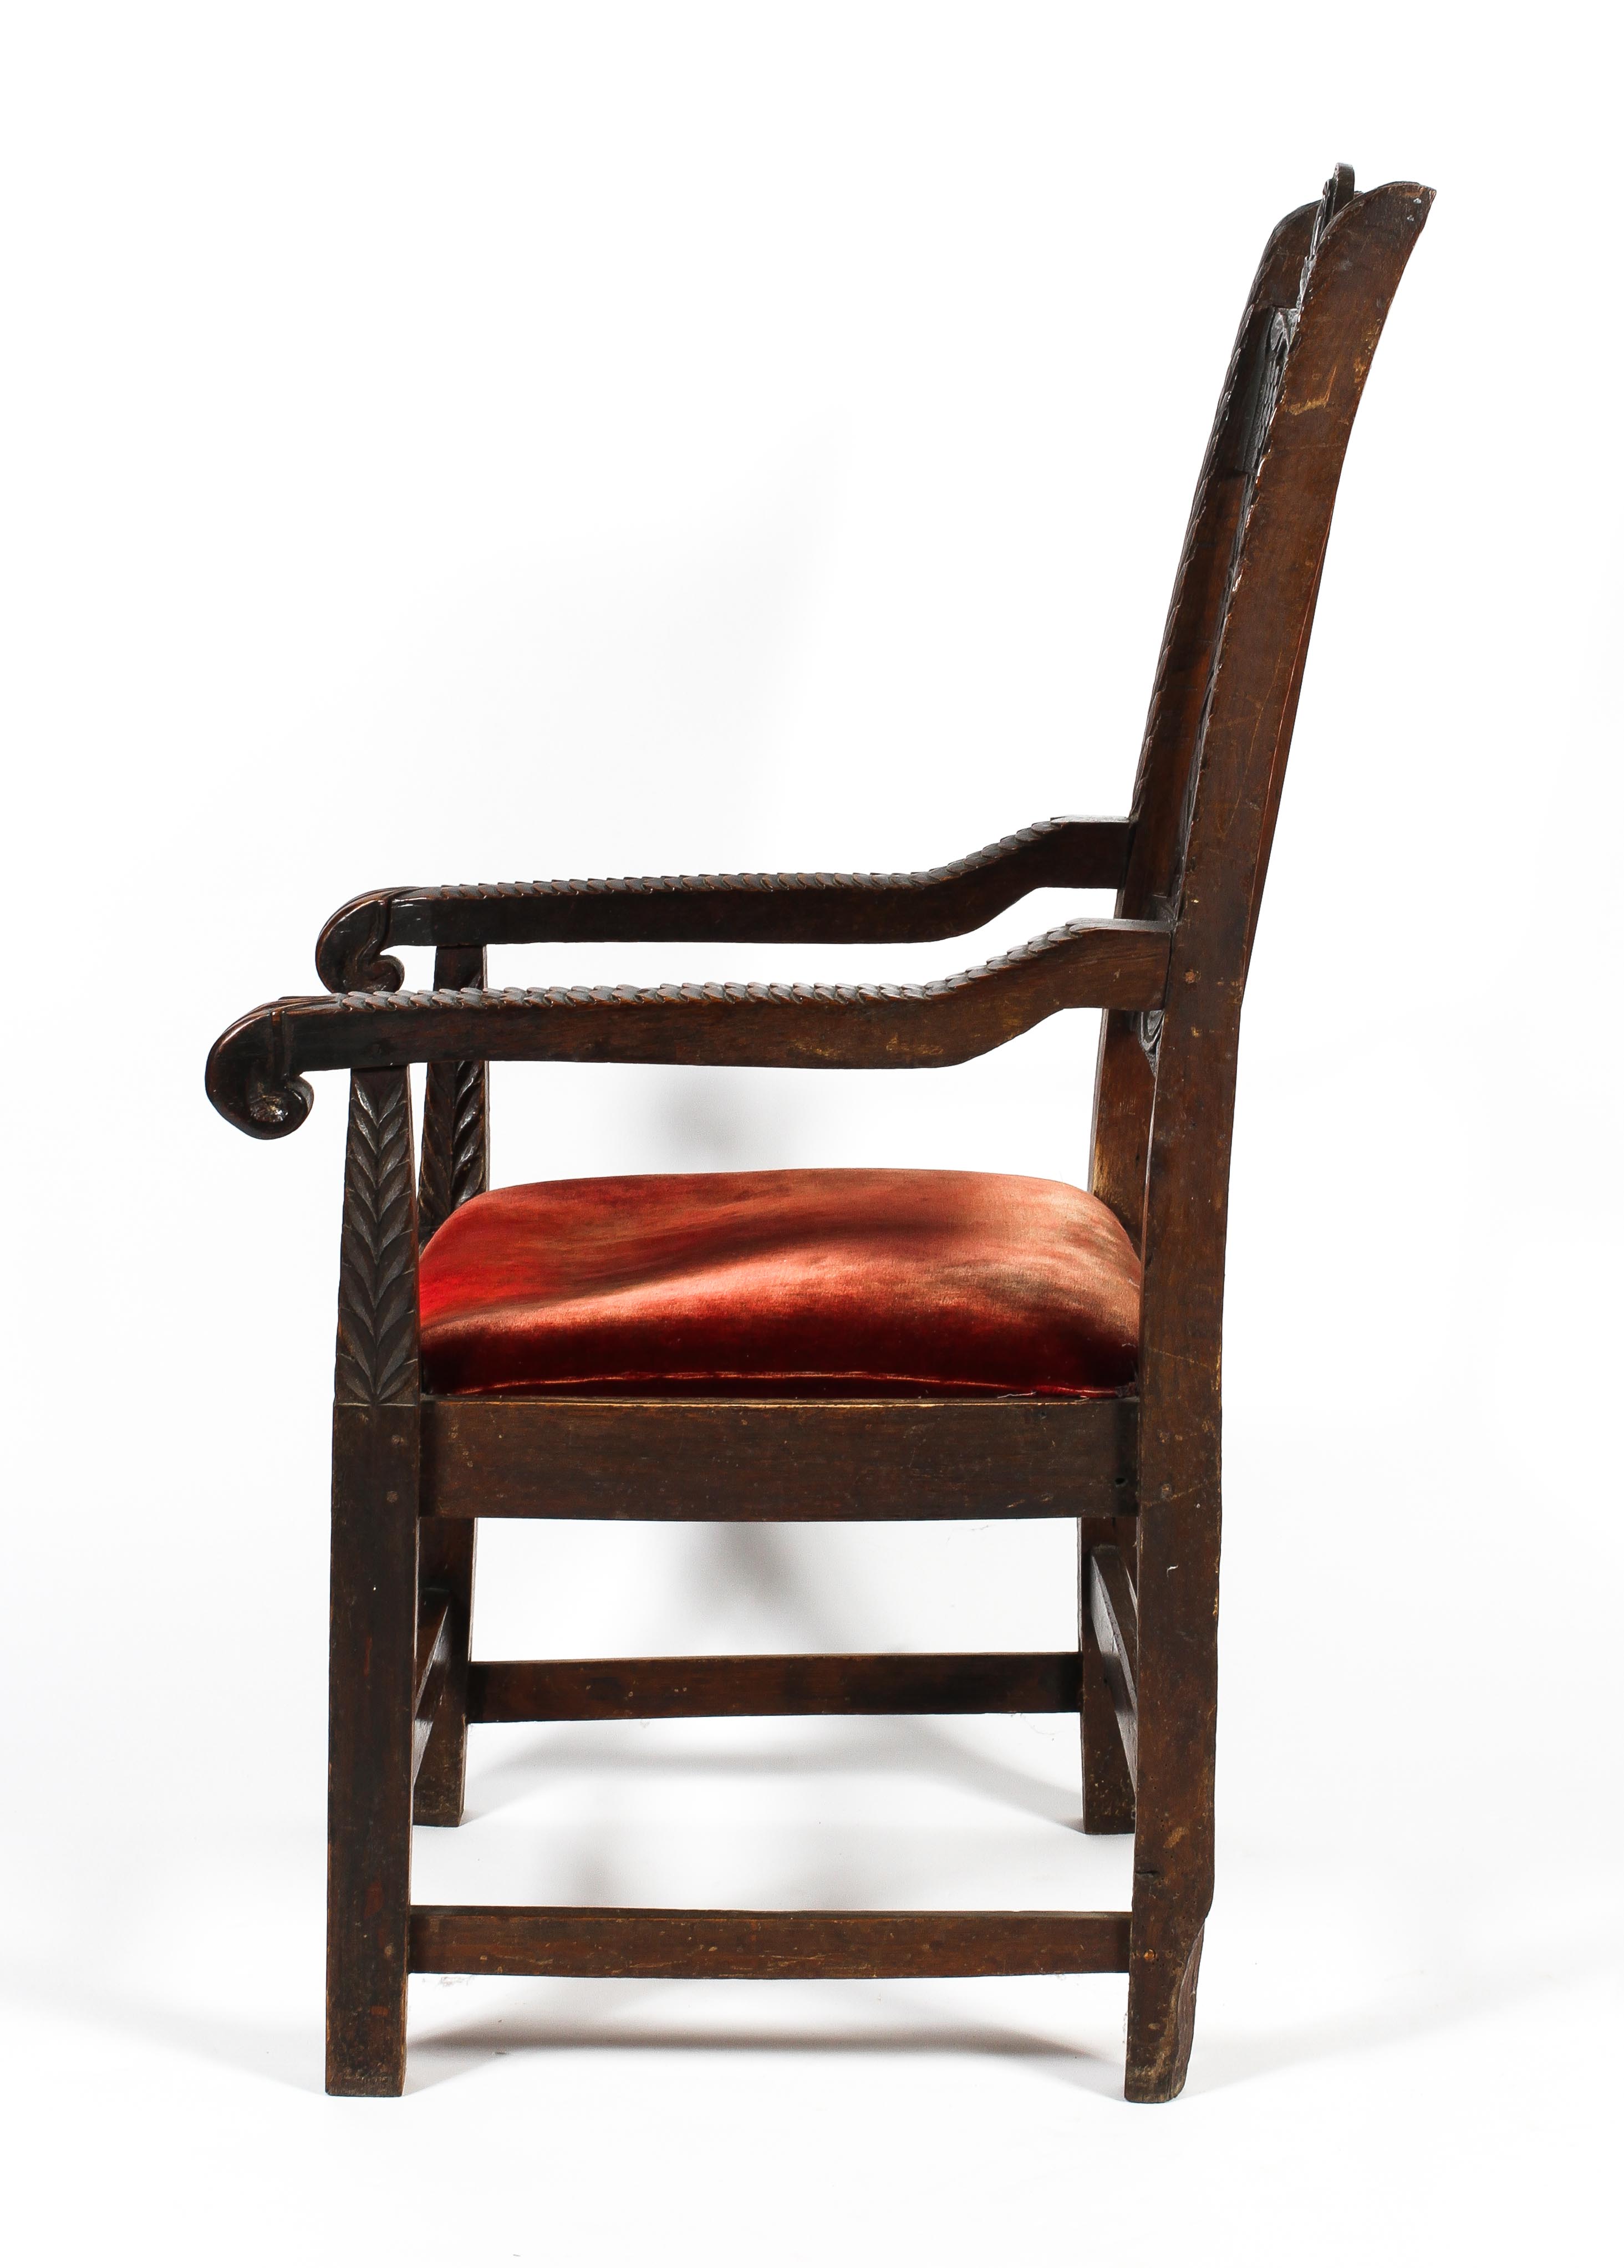 An early 19th century wainscot panelled back chair. - Image 3 of 3